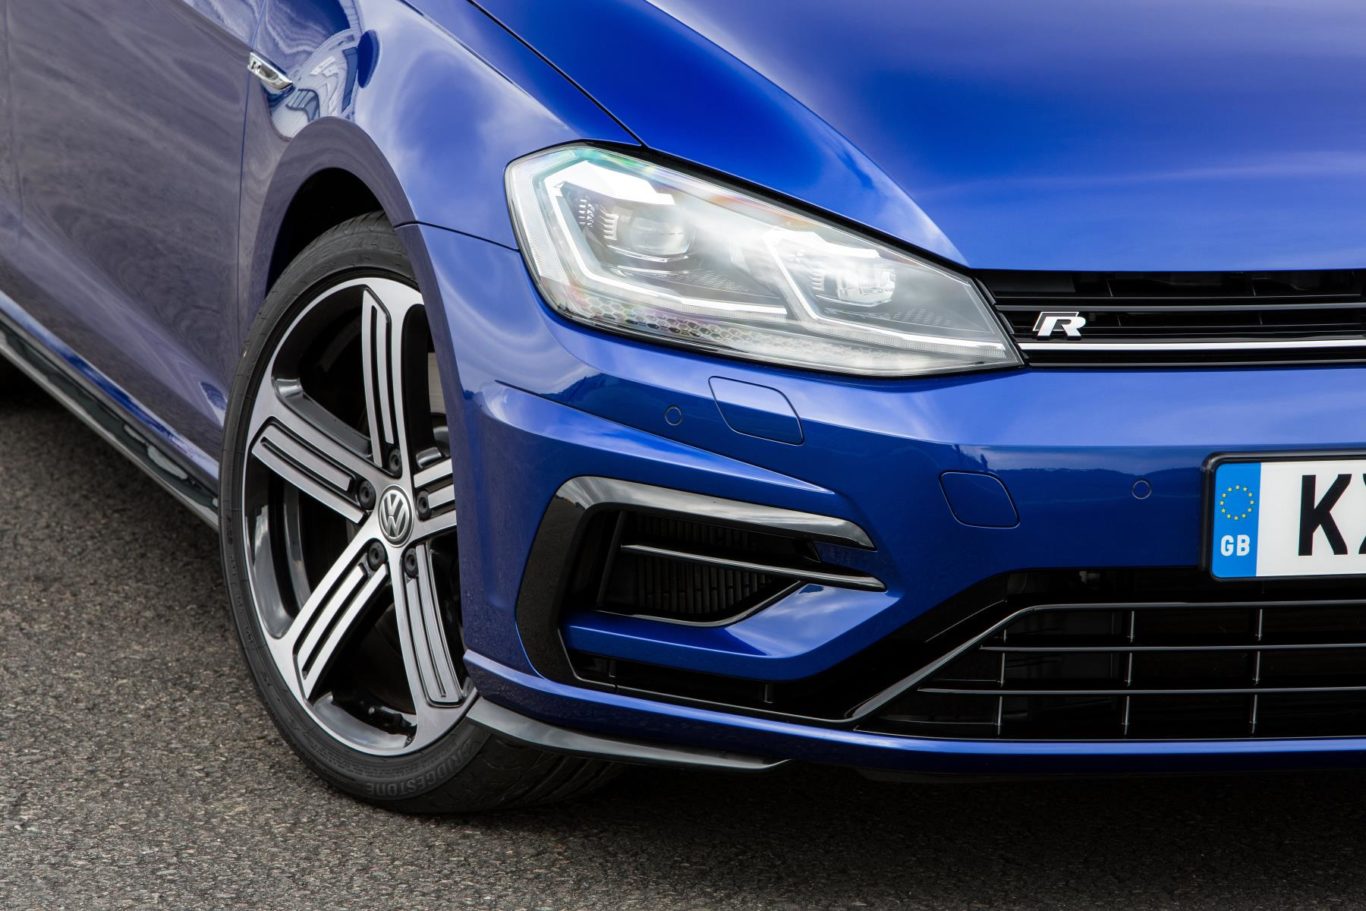 The Golf R sits on 18-inch alloy wheels as standard, though 19-inch versions are available as an optional extra